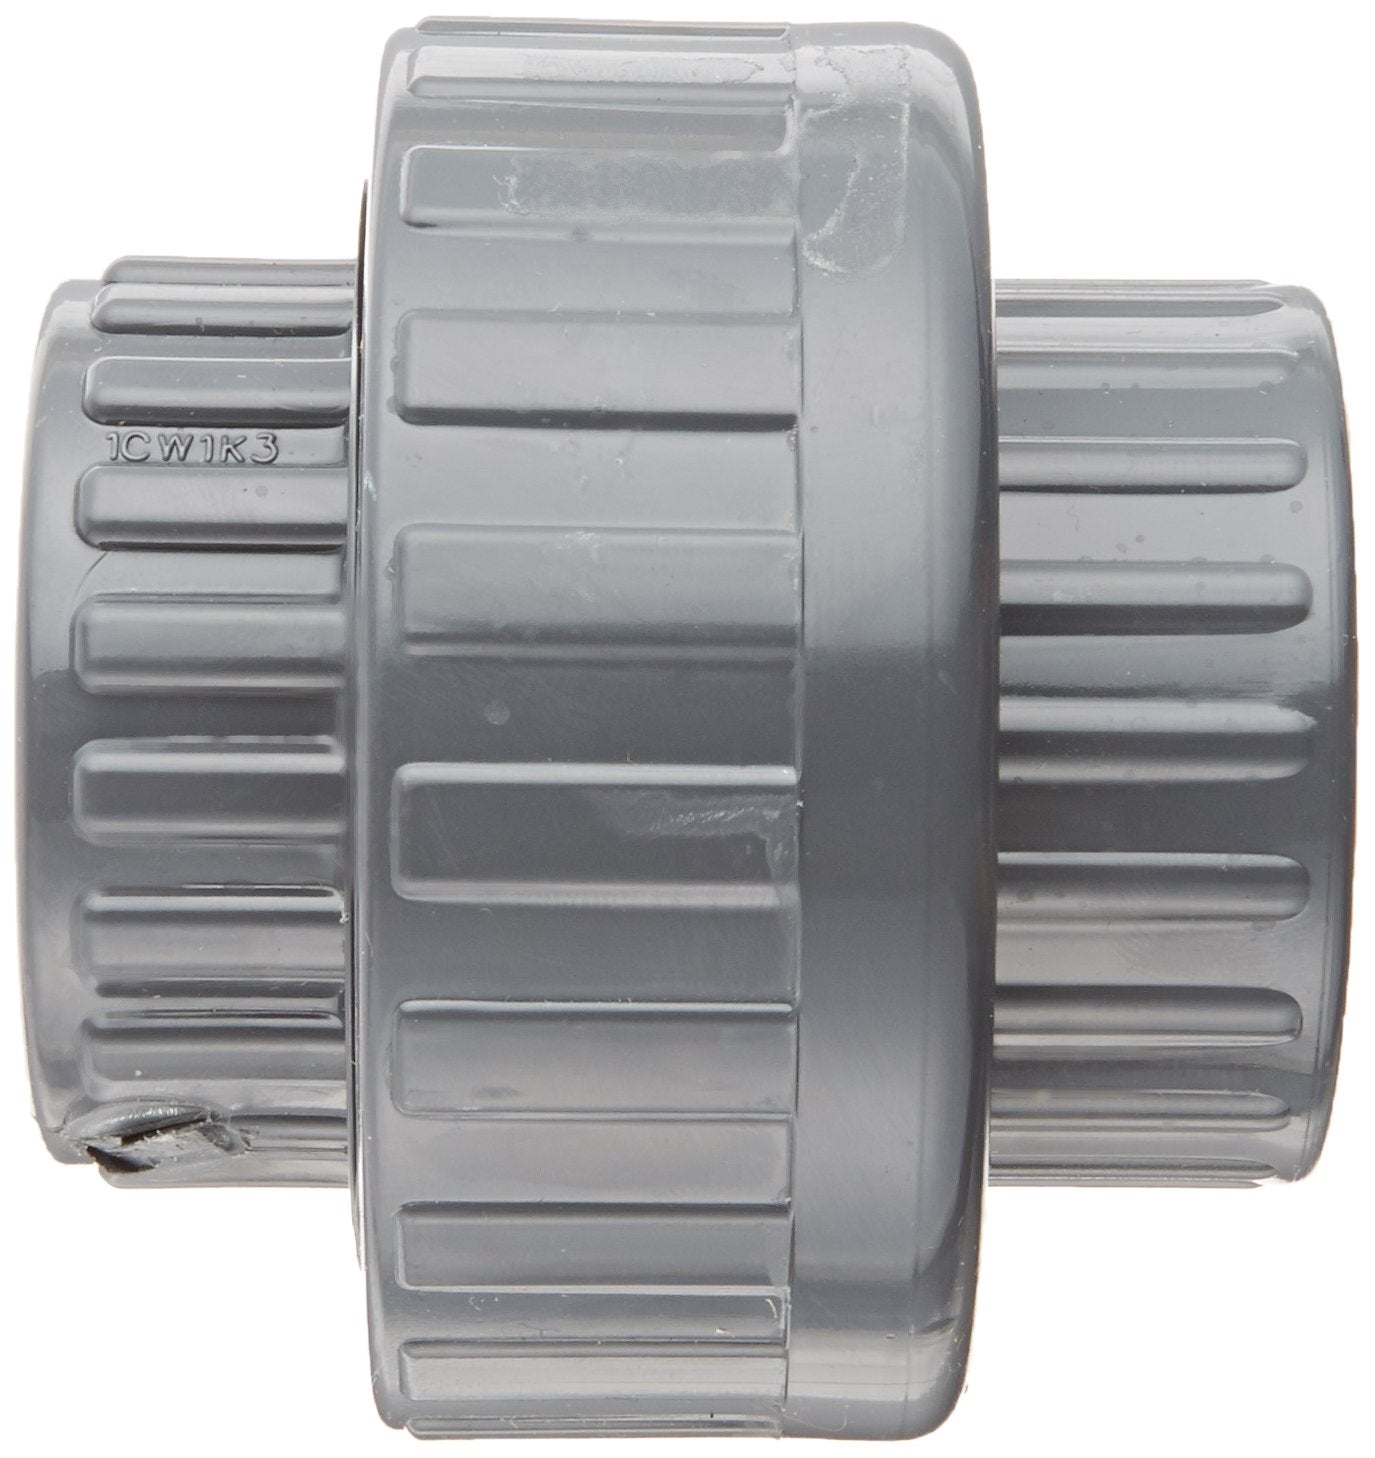 857-007 - PVC Pipe Fitting, Union with Viton O-Ring, Schedule 80, 3/4" Socket